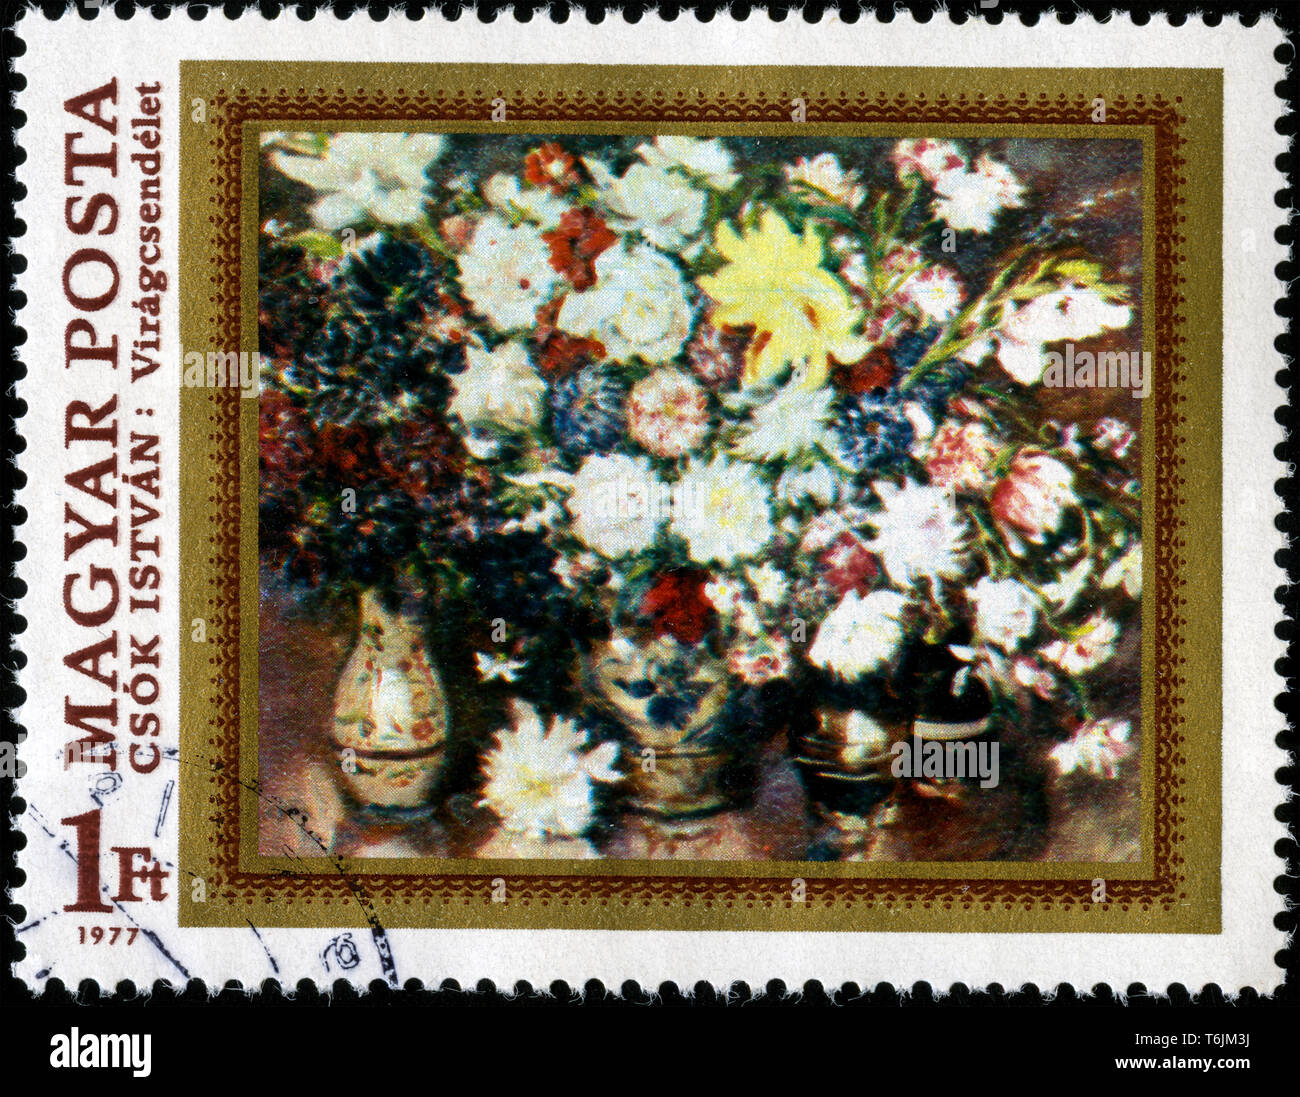 Postage stamp from Hungary in the Paintings - Flowers series issued in 1977 Stock Photo